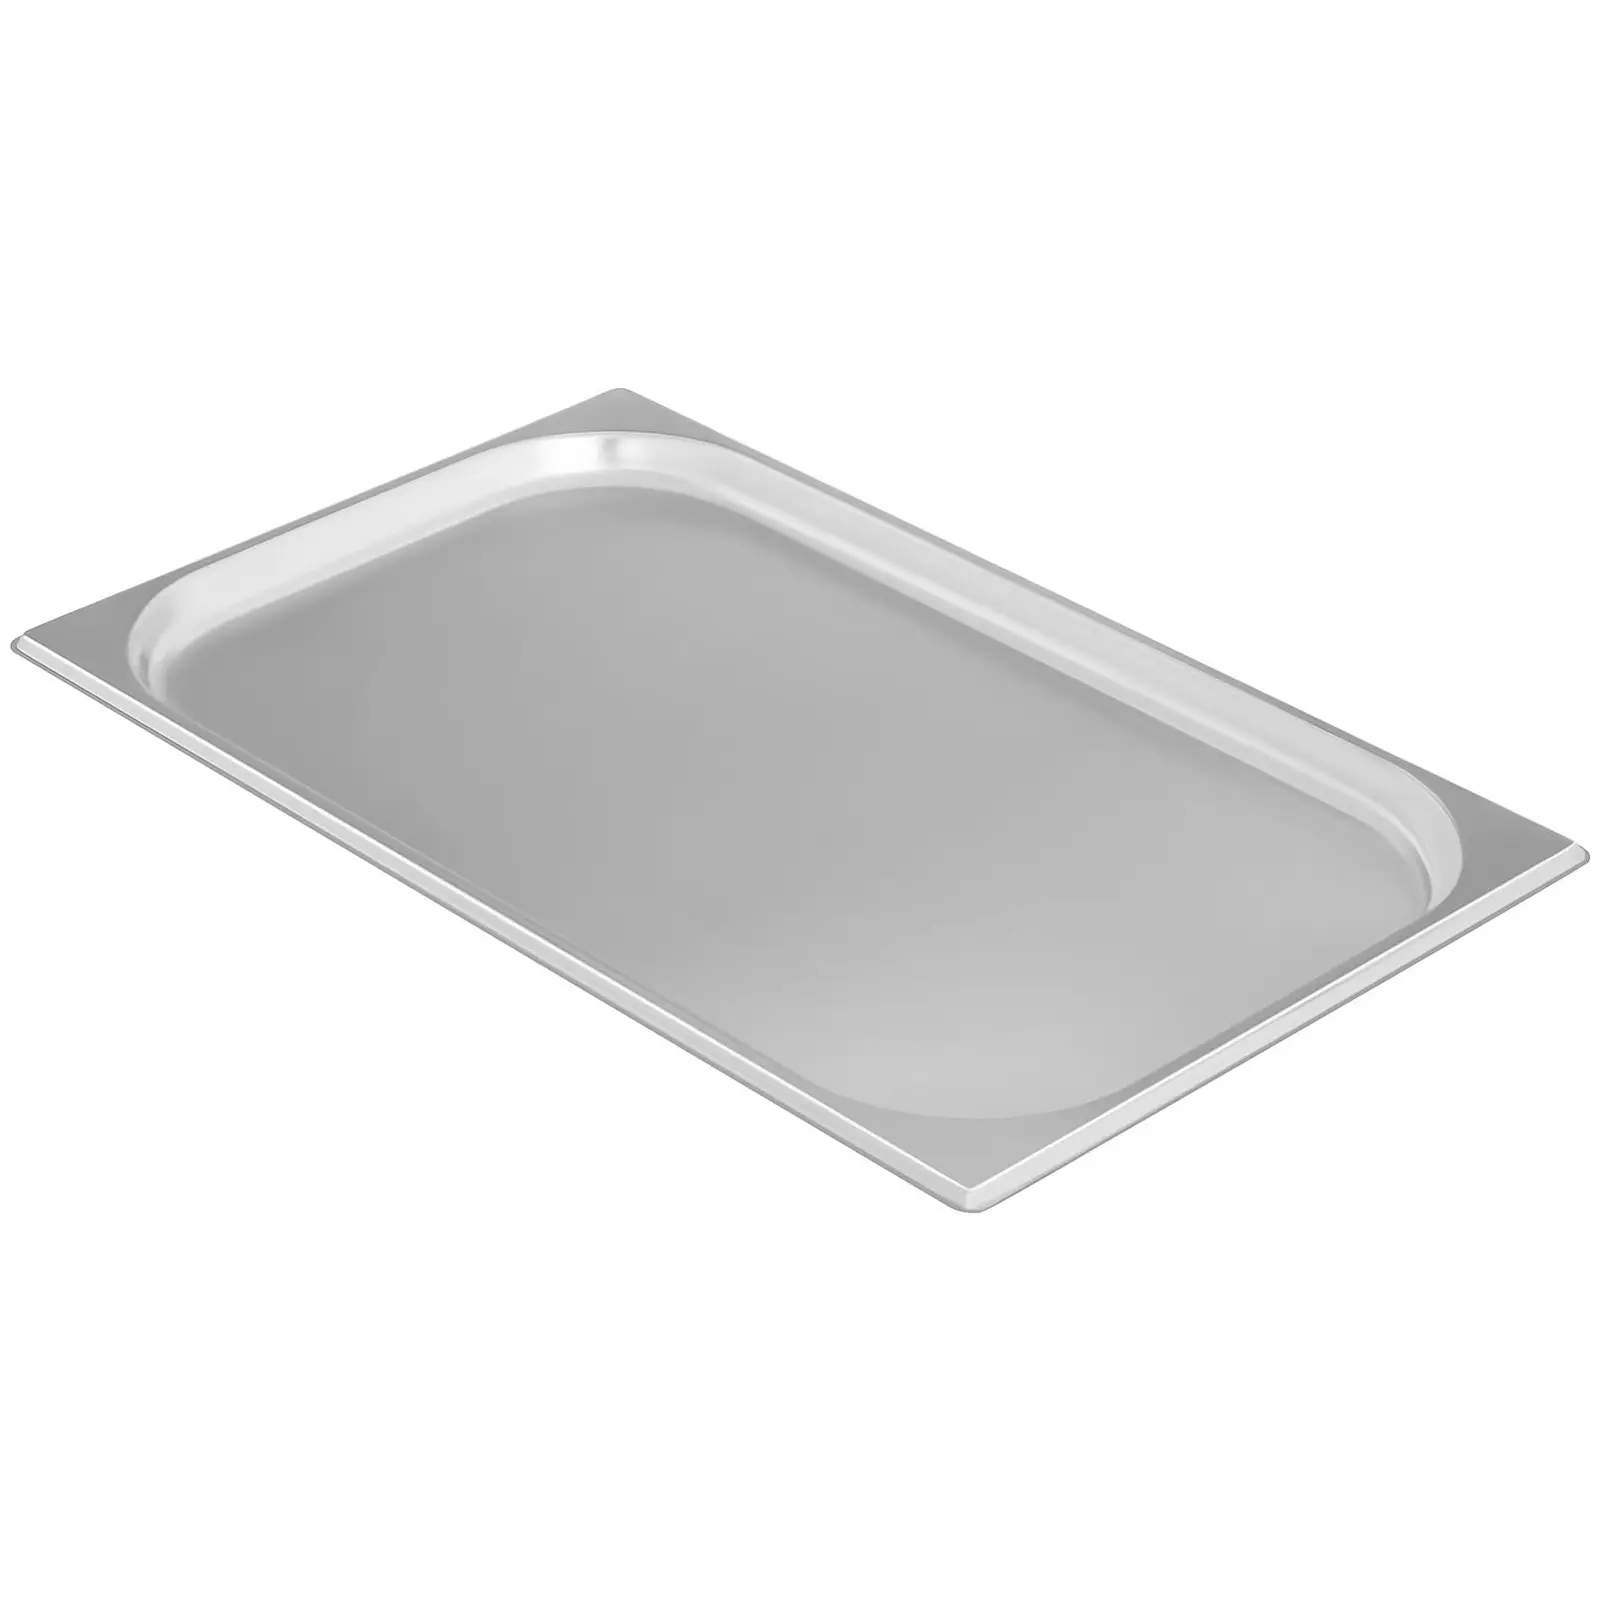 Gastronorm Tray - 1/1 - 20 mm